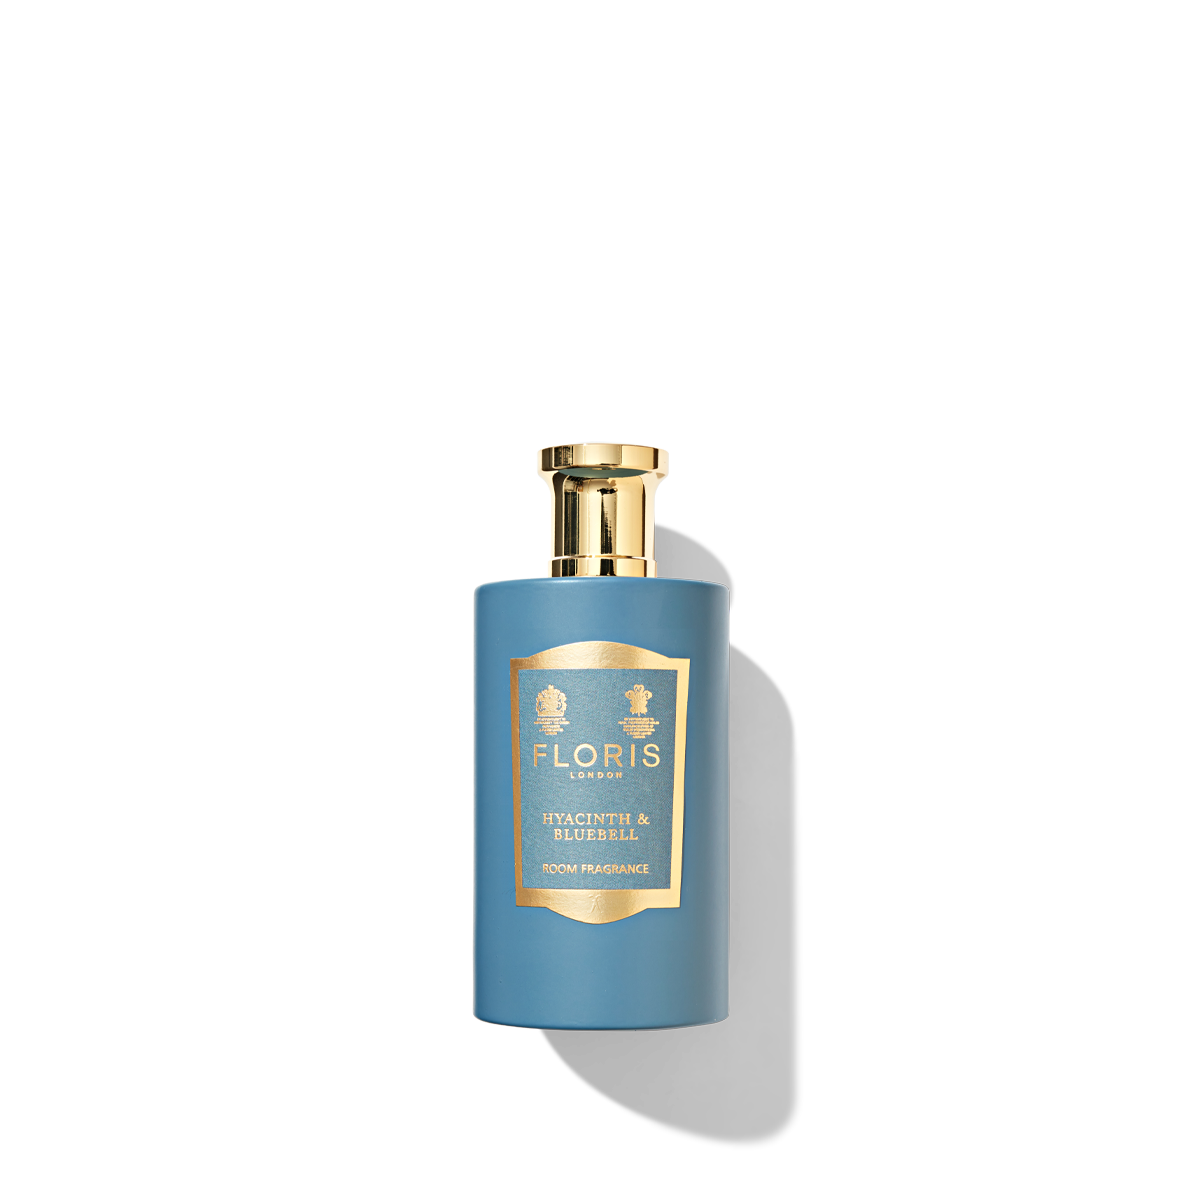 Hyacinth & Bluebell Room Fragrance in medium blue bottle with blue and gold label